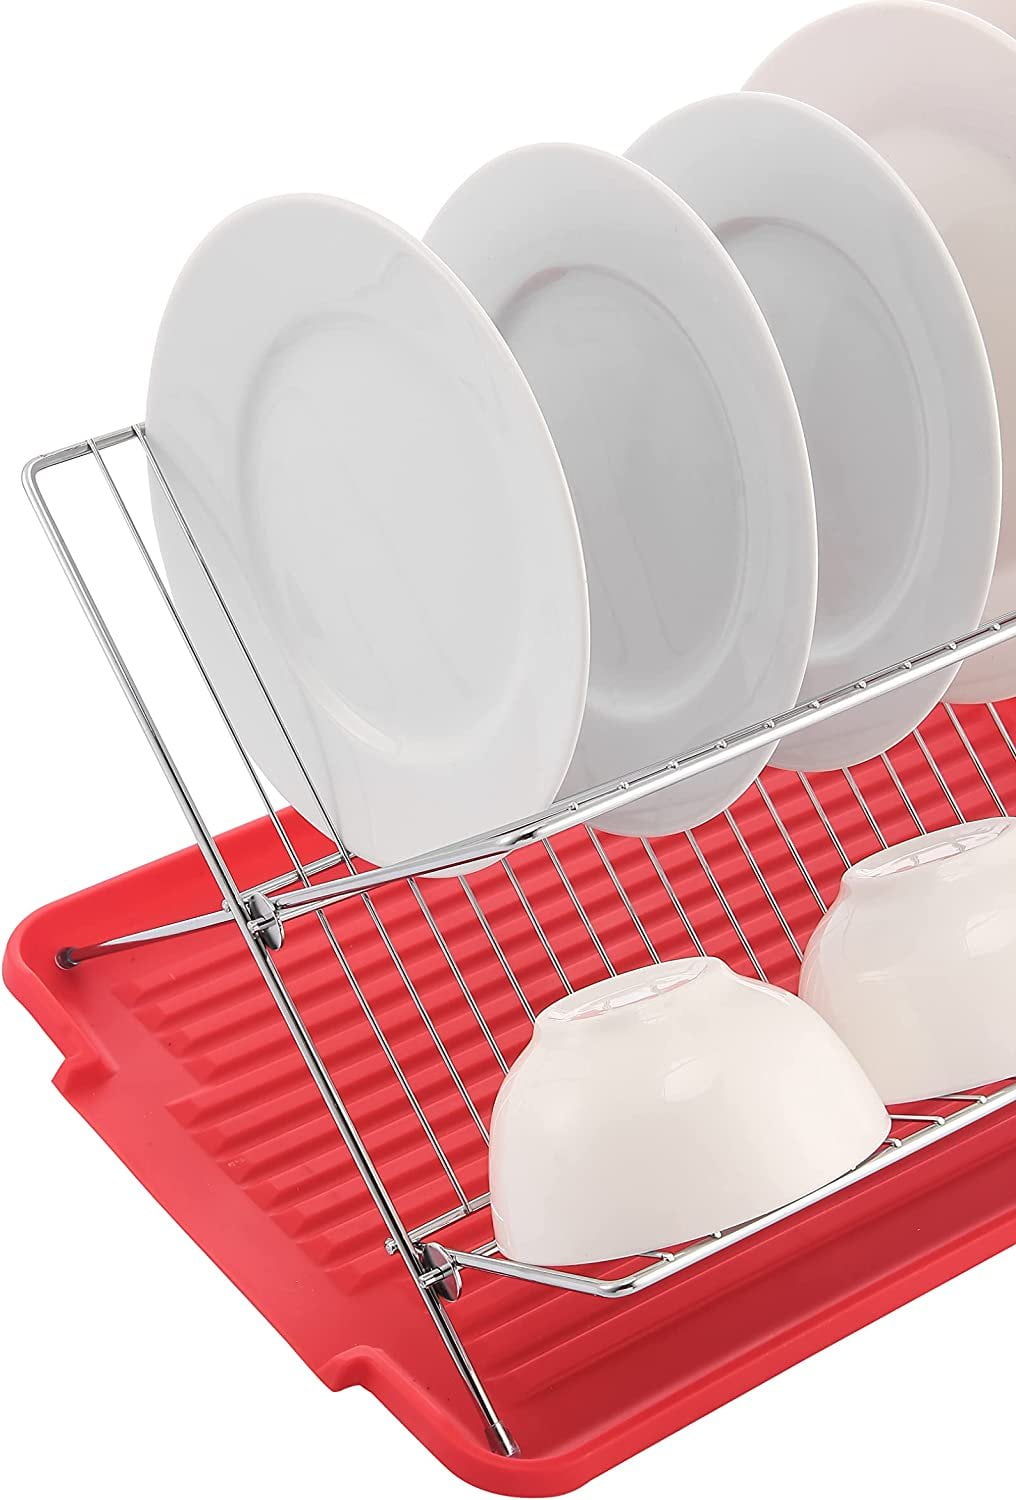 J&v Textiles Foldable Dish Drying Rack With Drainboard, Stainless Steel 2  Tier Dish Drainer Rack (white) : Target